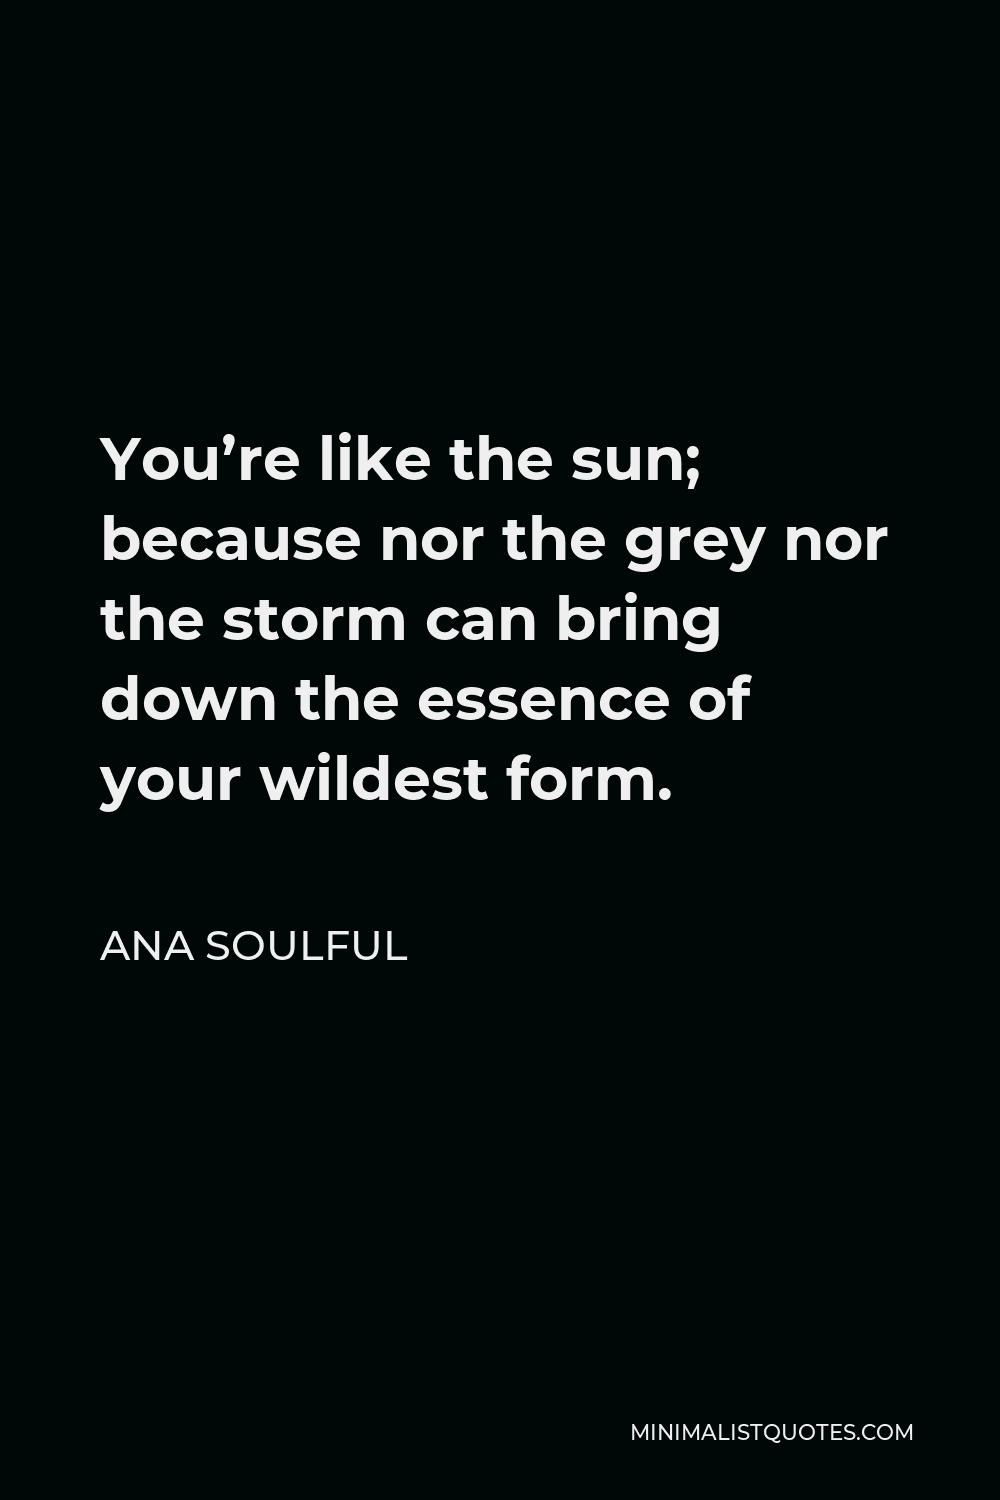 Ana Soulful Quote - You’re like the sun; because nor the grey nor the storm, can bring down the essence of your wildest form.